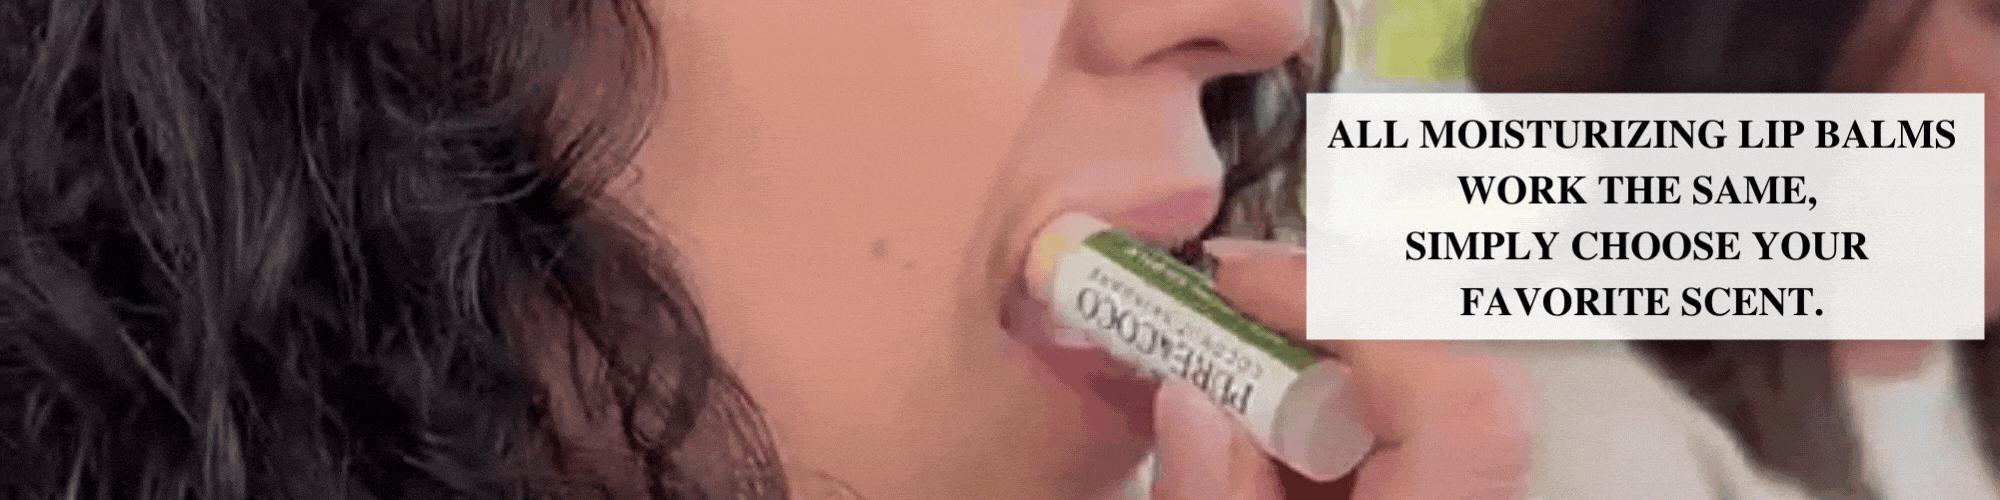 Load video: women applying a vegan moisturizing lip balm for dry, chapped lips for fast natural relief by pure and coco